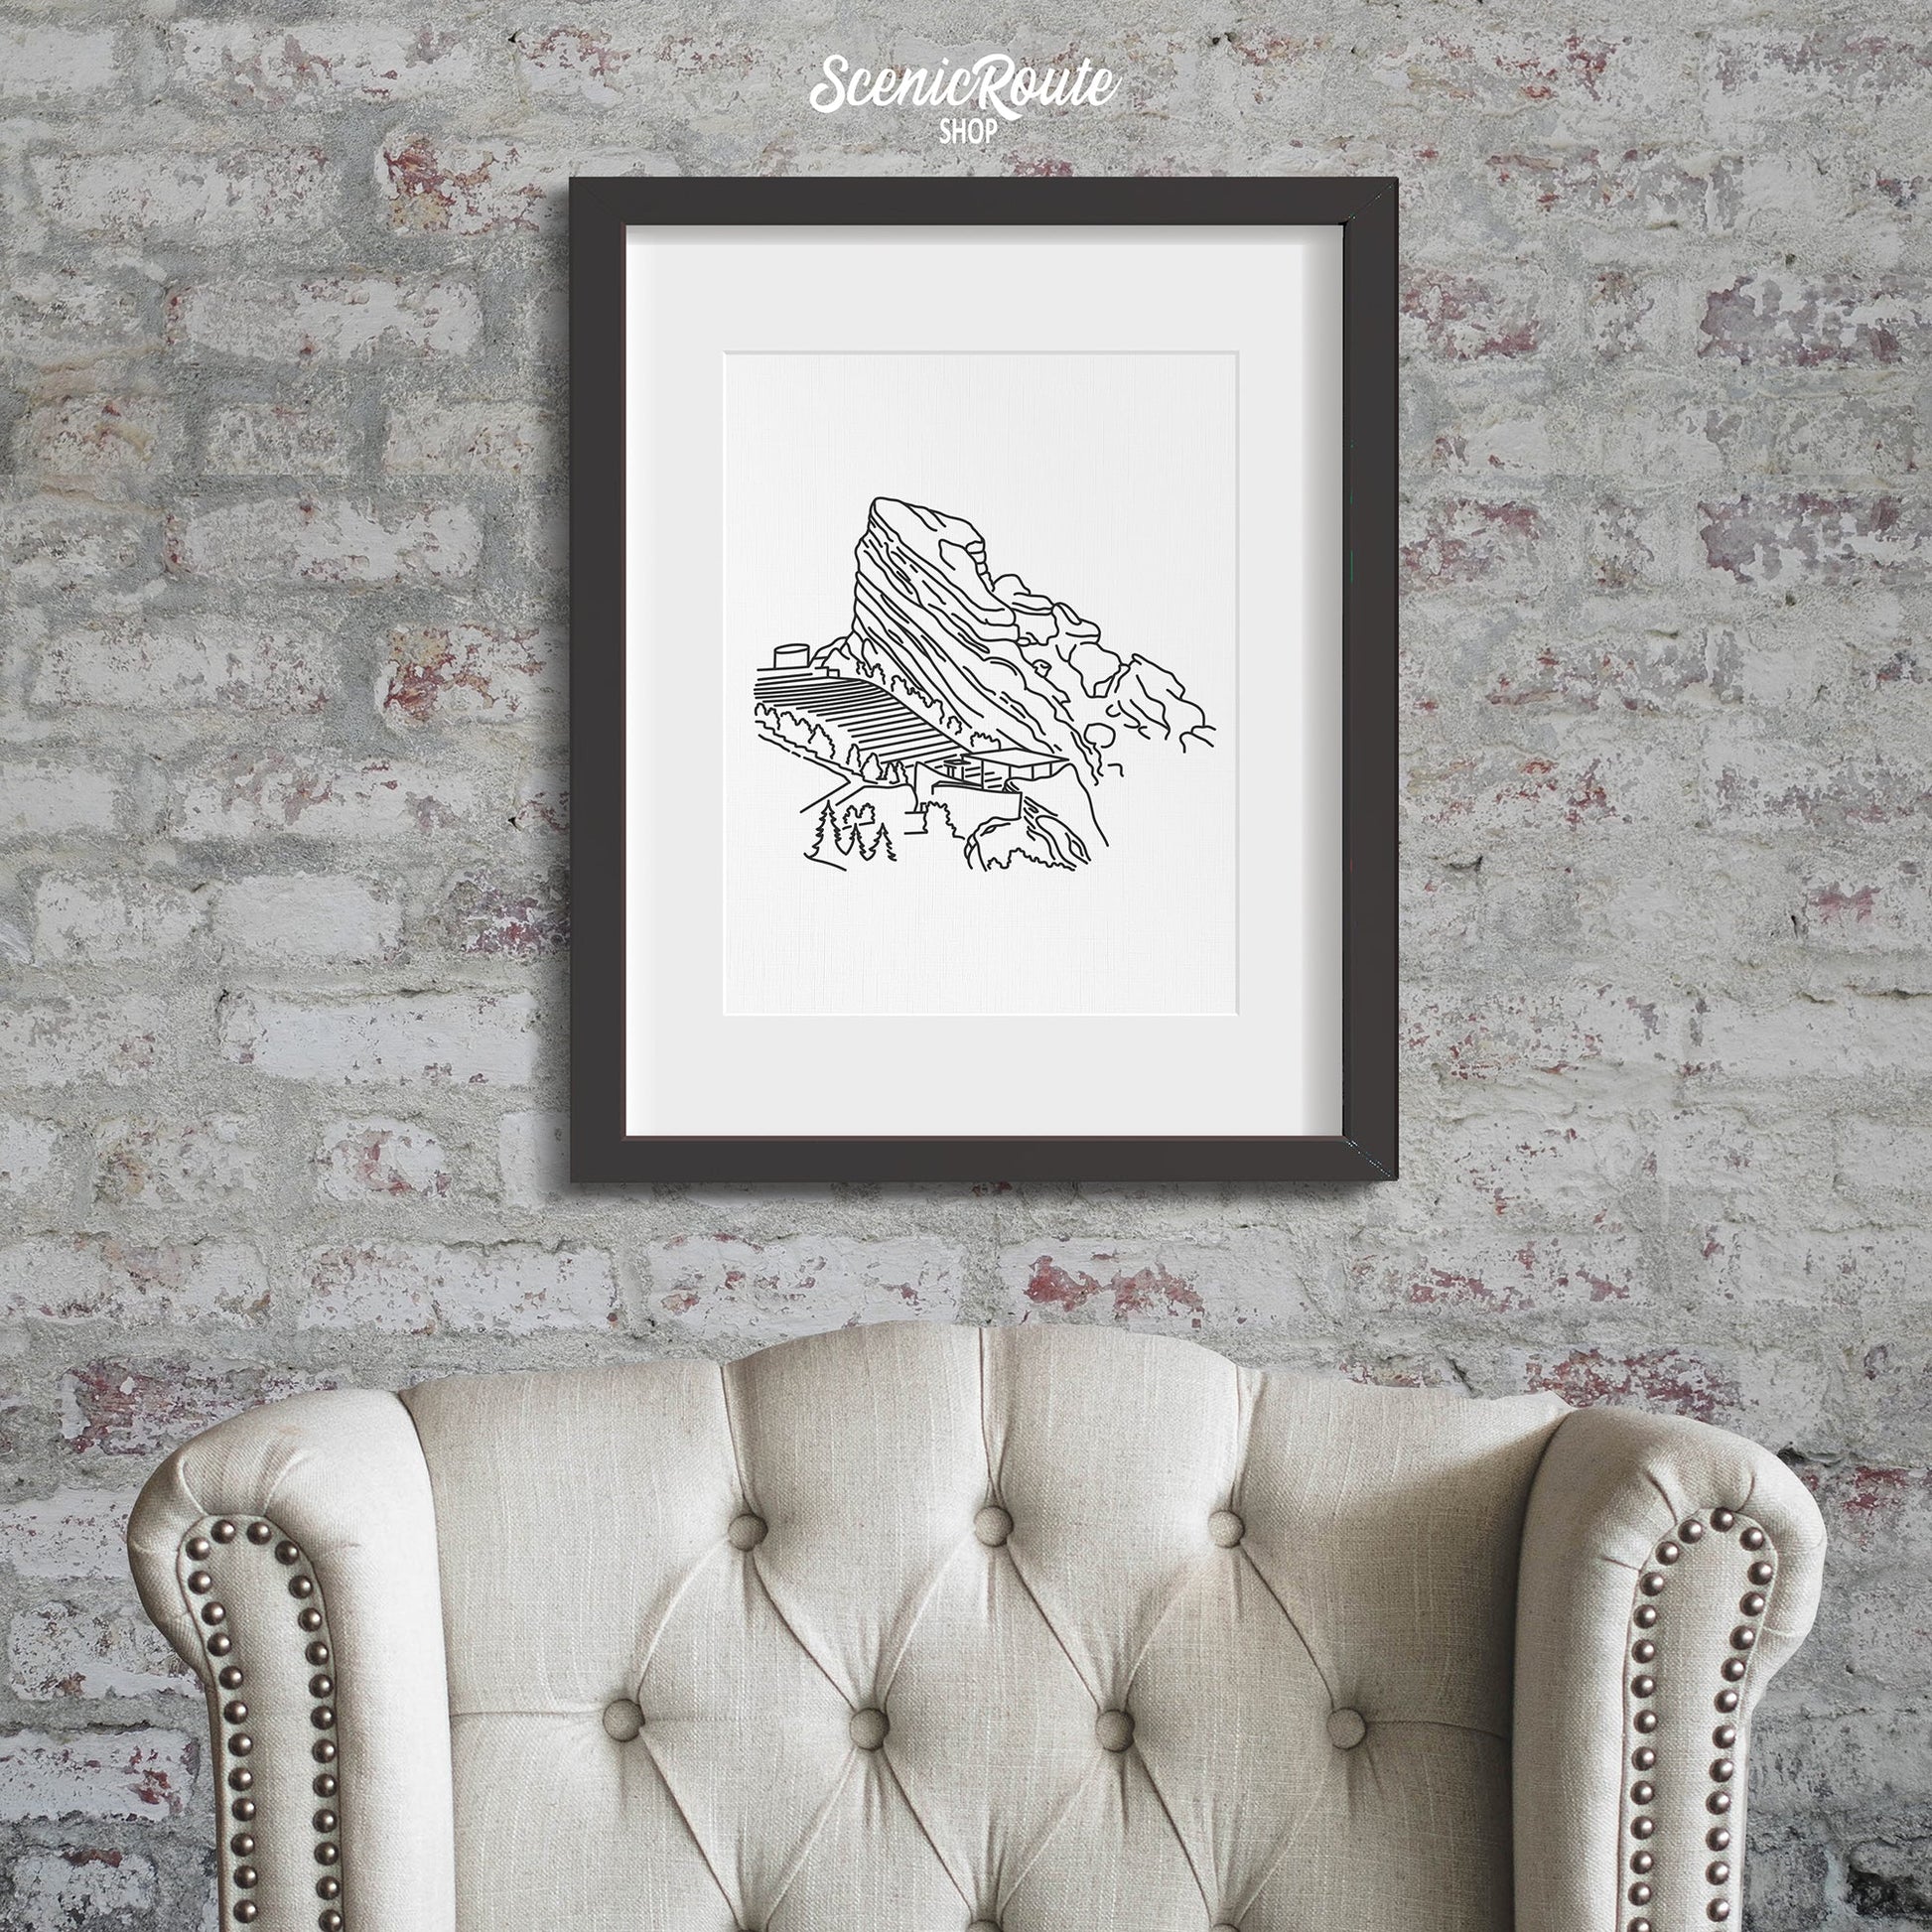 A framed line art drawing of the Red Rocks Amphitheatre on a brick wall above a chair